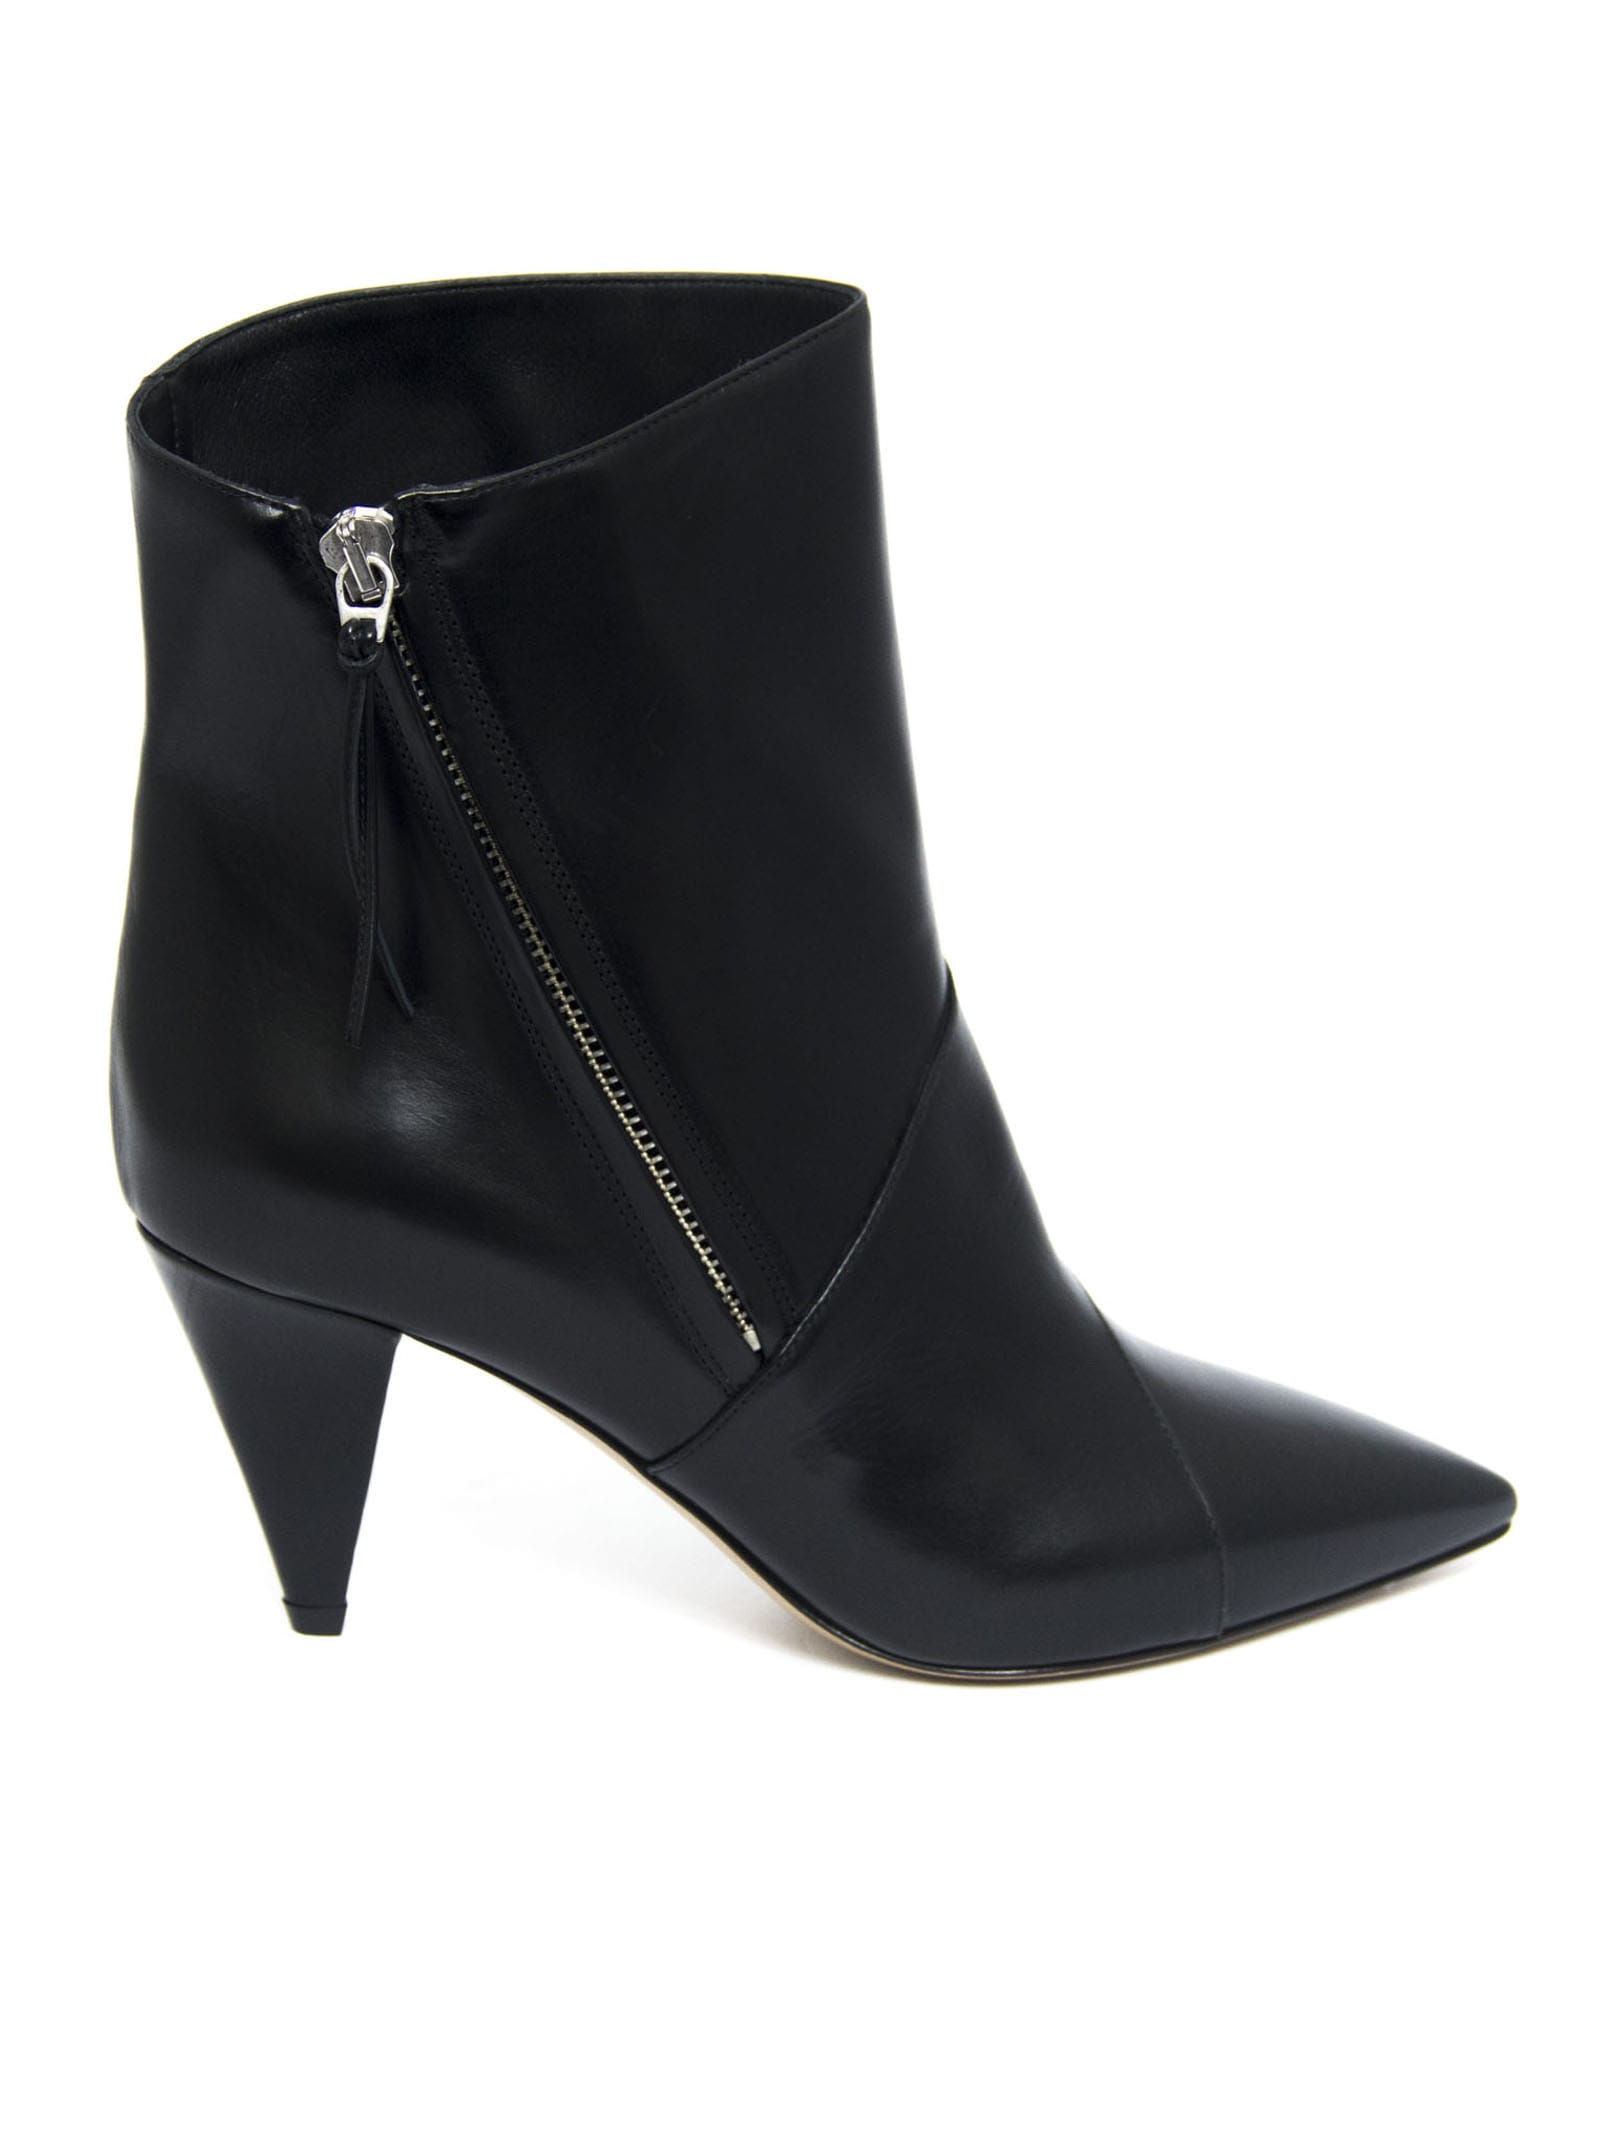 Buy Isabel Marant Black Leather Latts Boots online, shop Isabel Marant shoes with free shipping